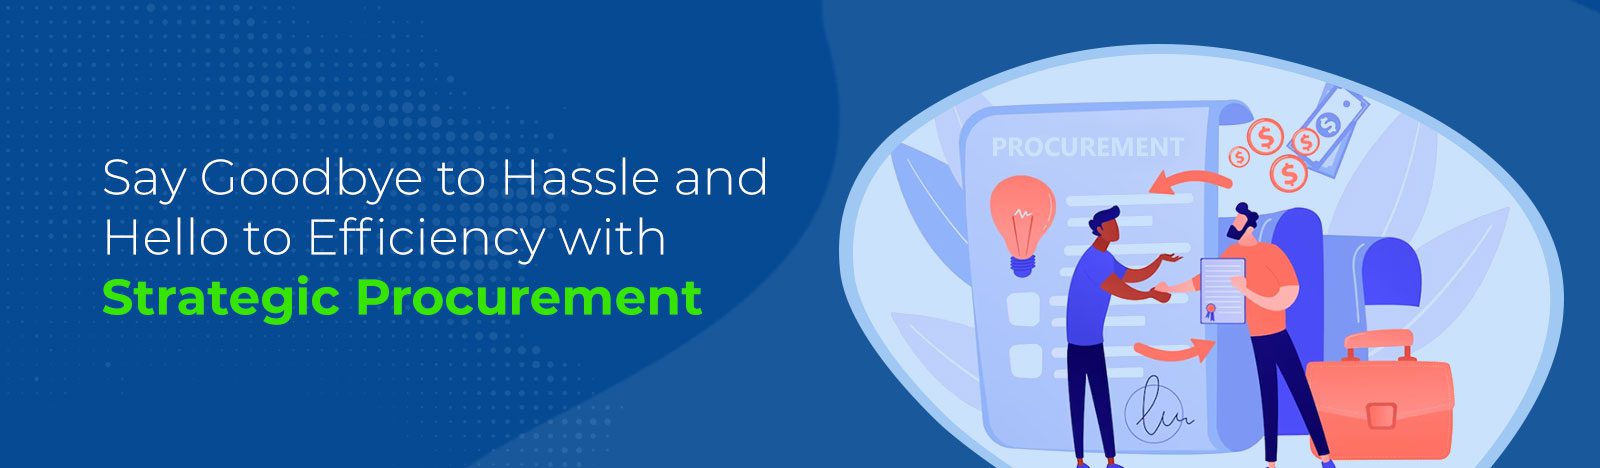 Say Goodbye to Hassle and Hello to Efficiency with Strategic Procurement